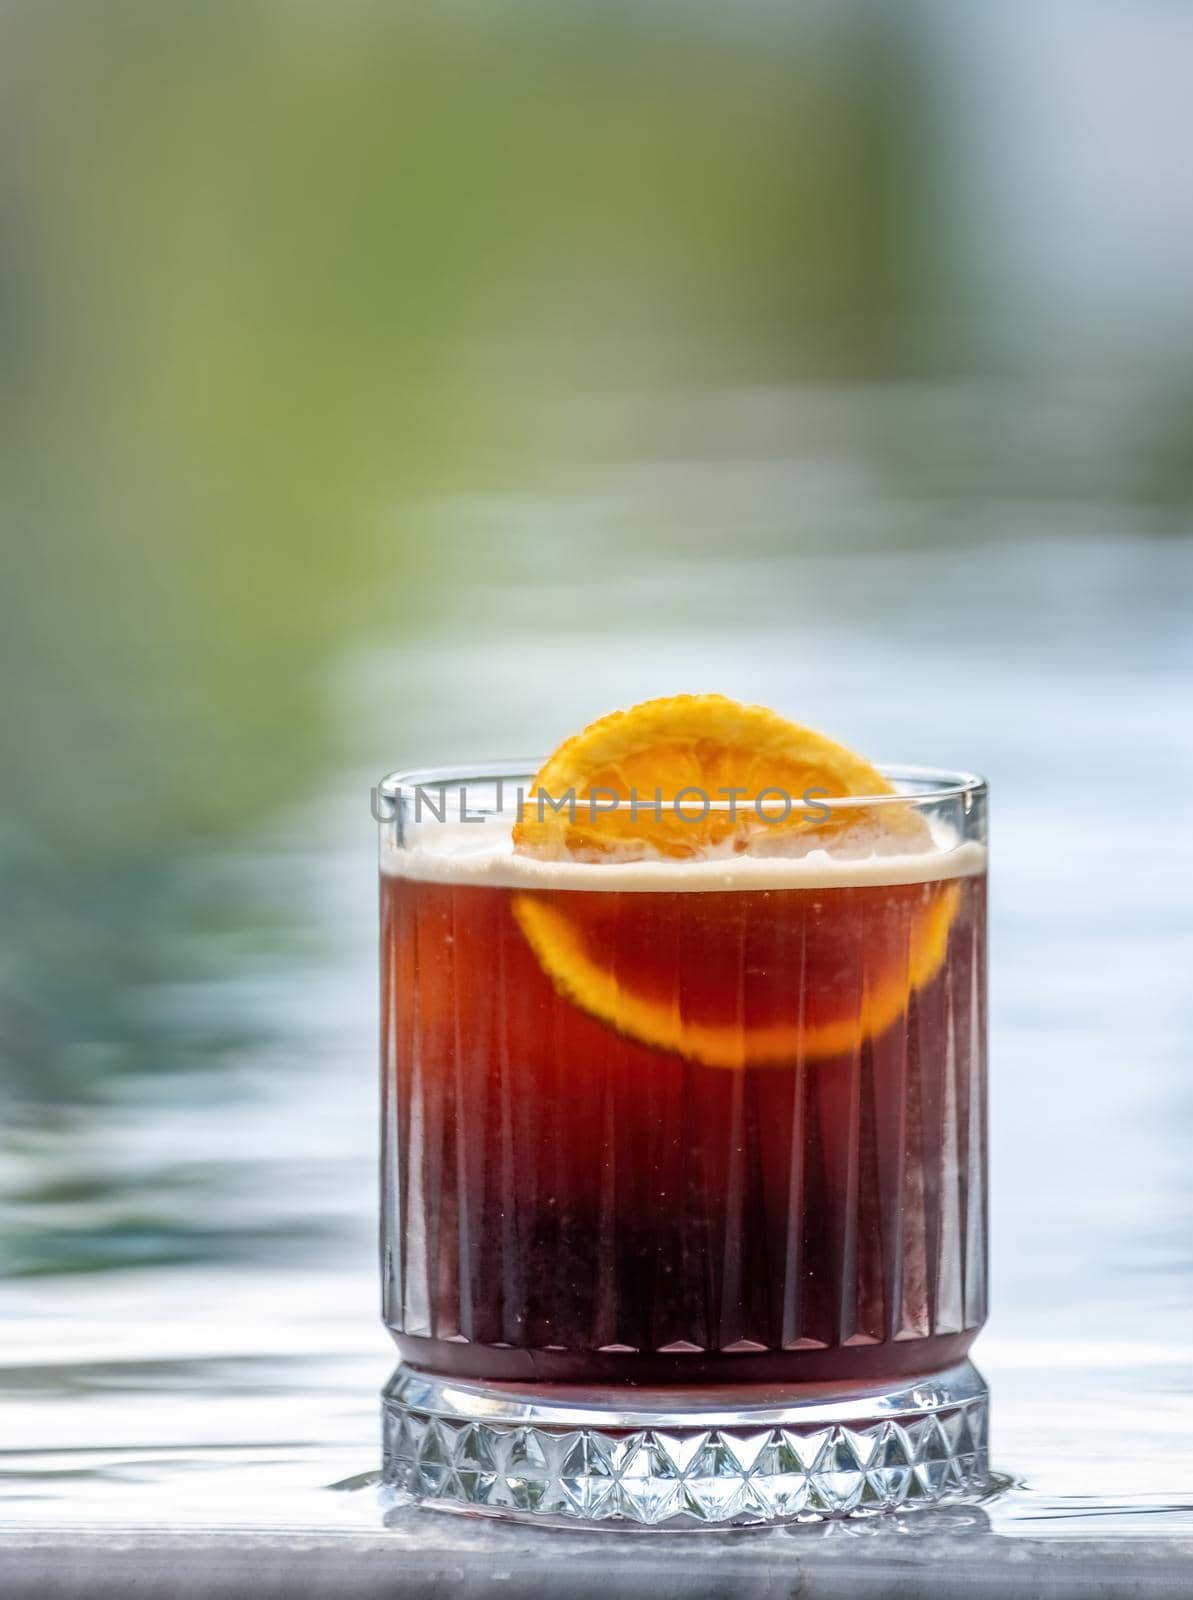 Refreshing citrus and alcoholic cocktail on blurry background